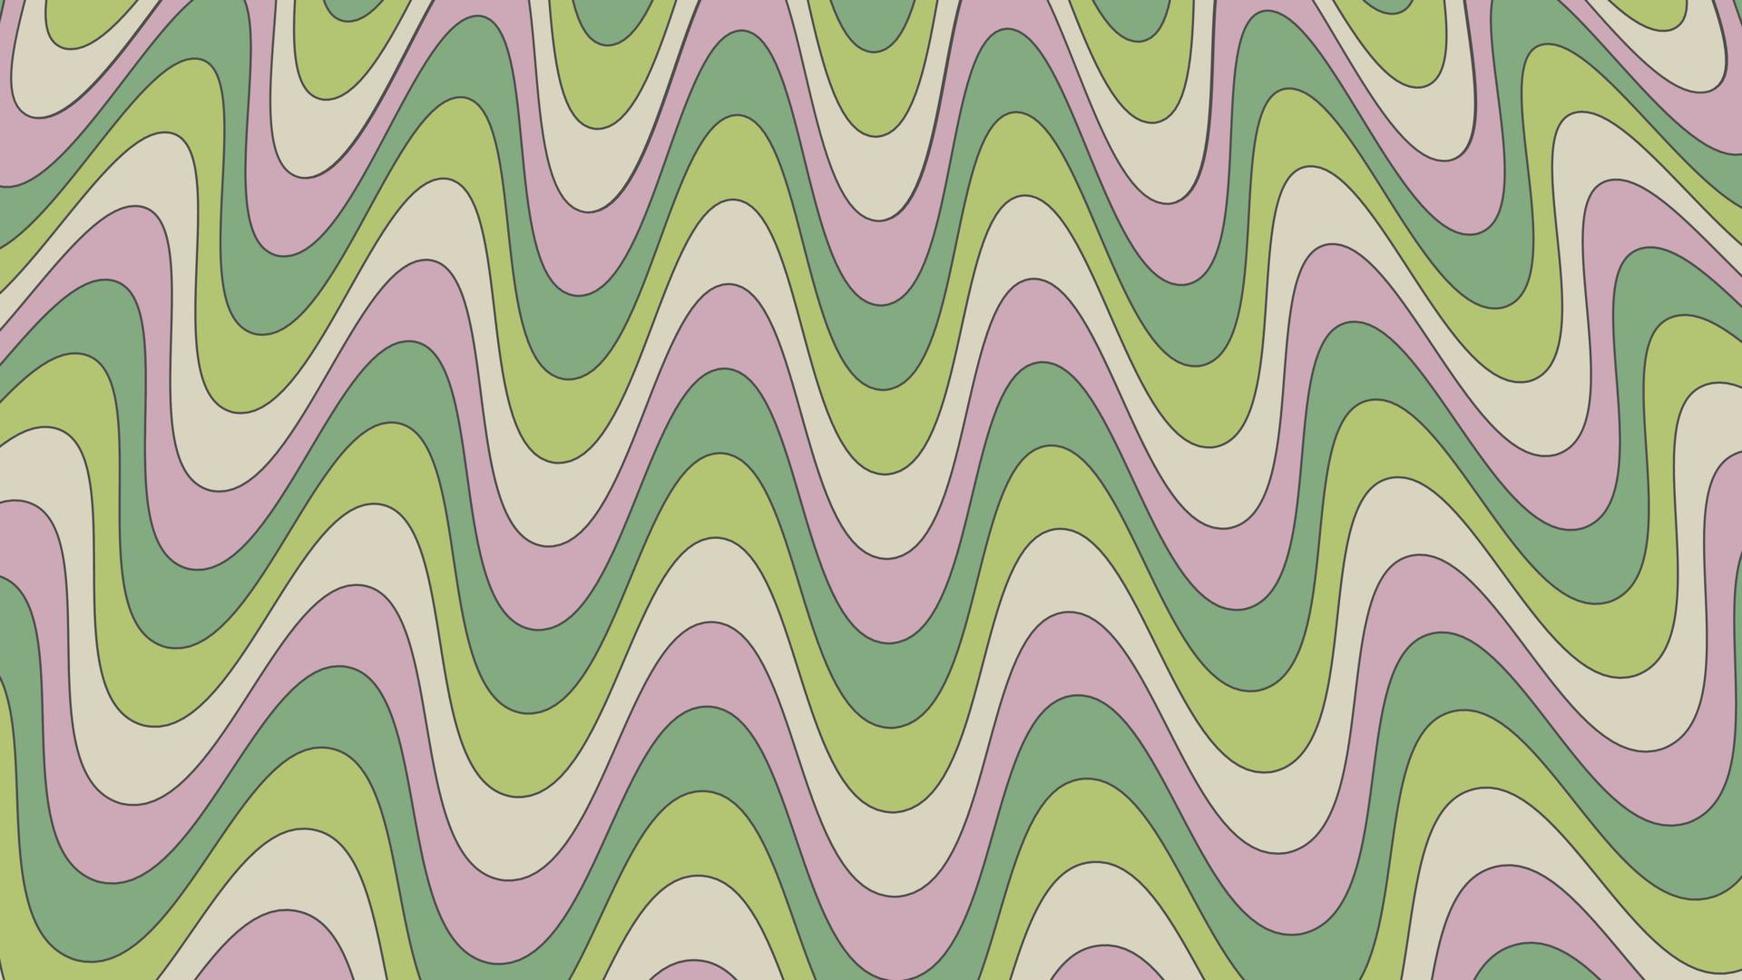 Groovy psychedelic wavy background in 70s style. Funky hippie backdrop for surface design. Abstract retro line art. Trendy vector illustration with colorful waves. Beige, pink and green pastel color